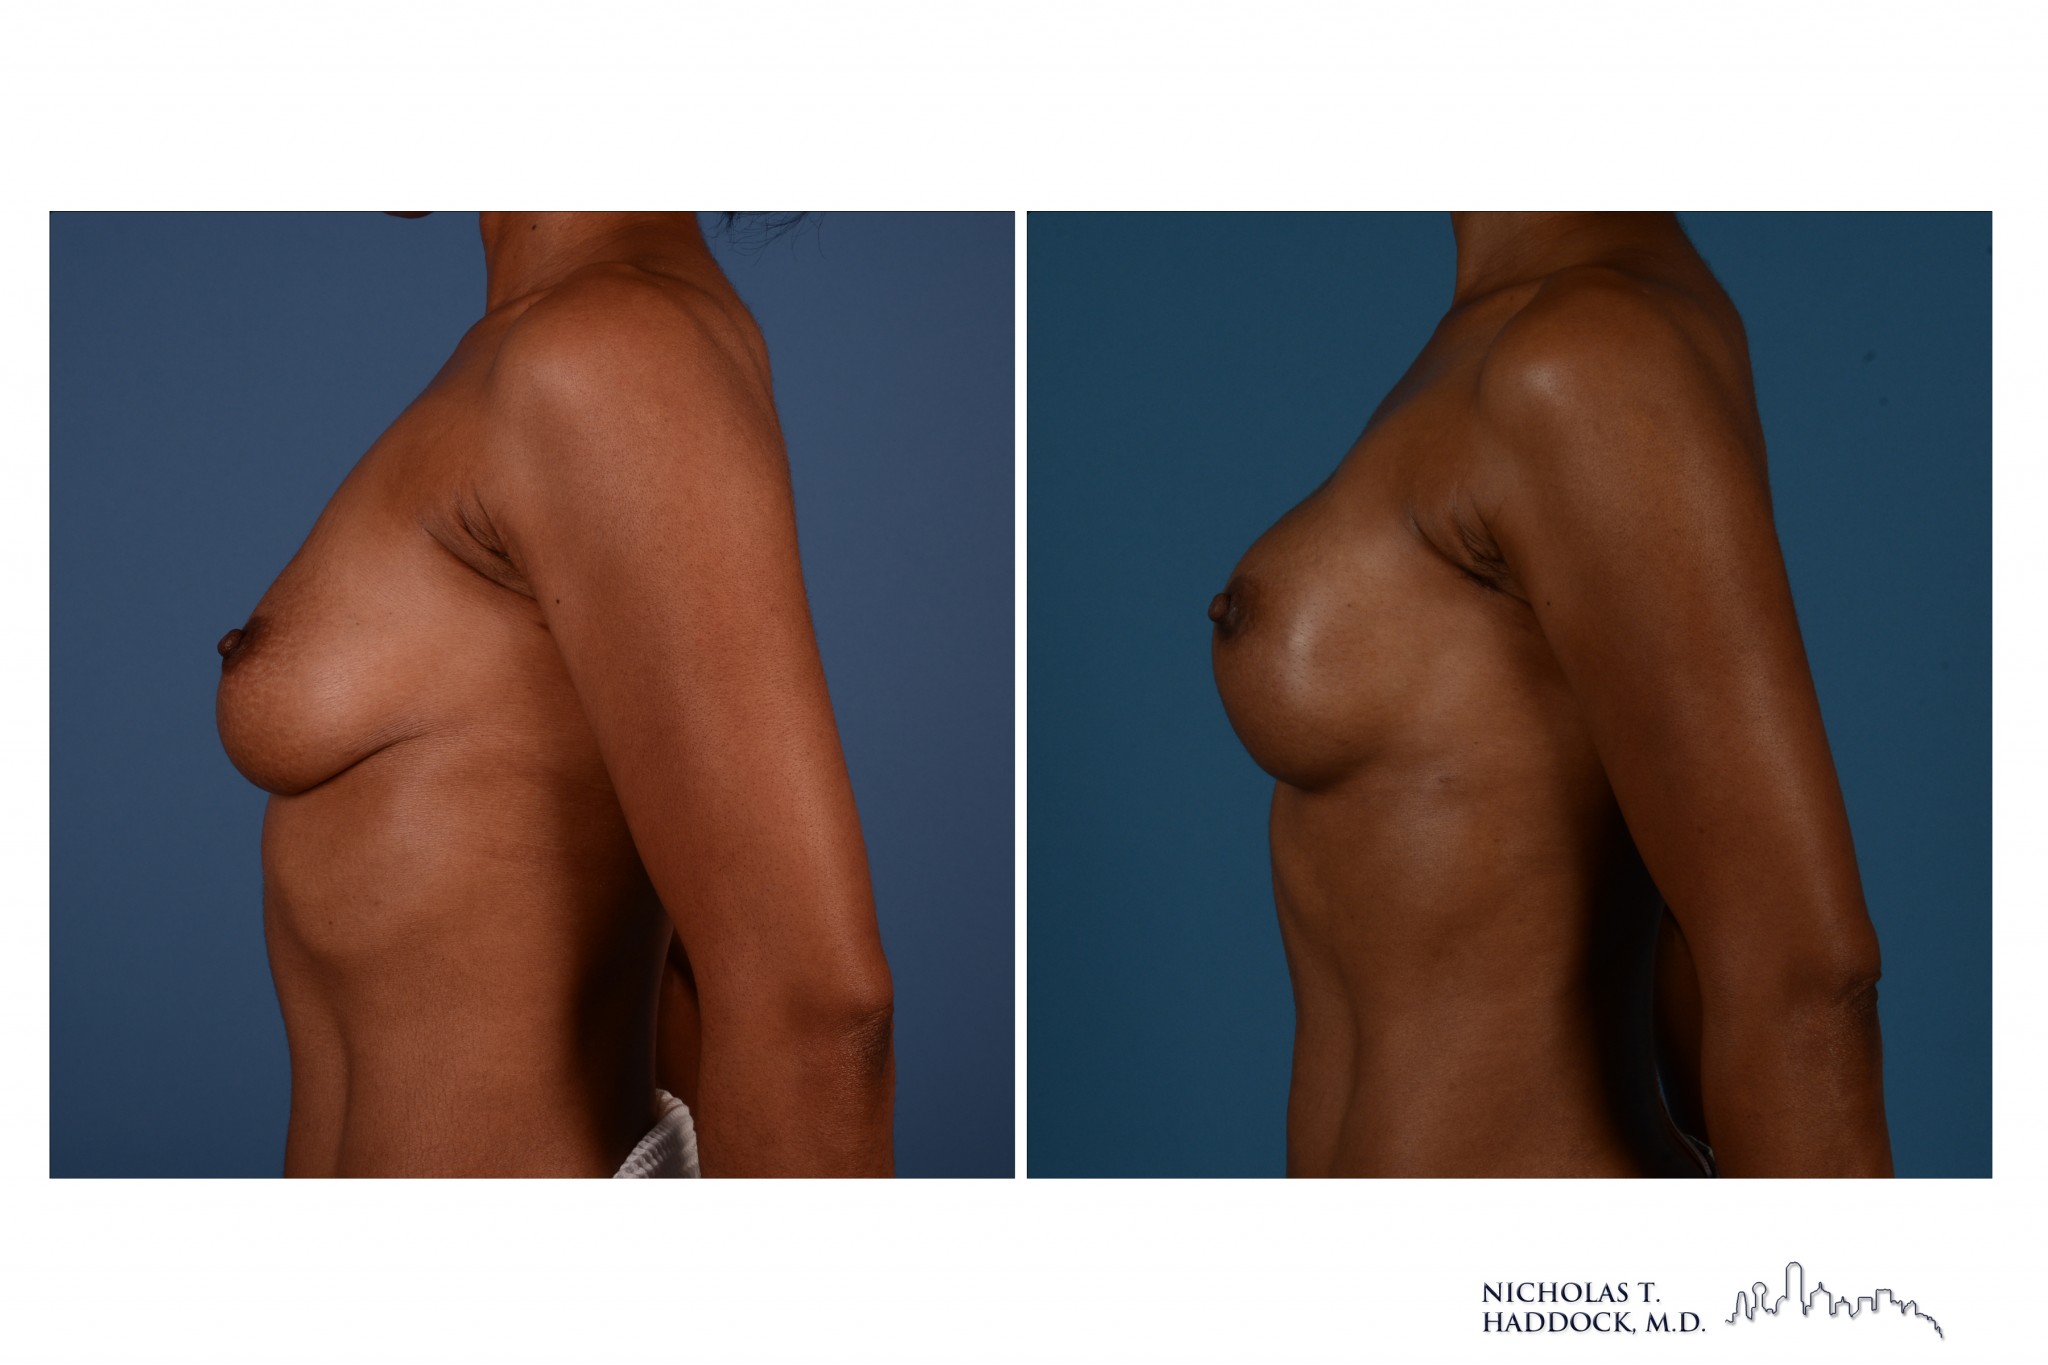 Breast Implant Reconstruction